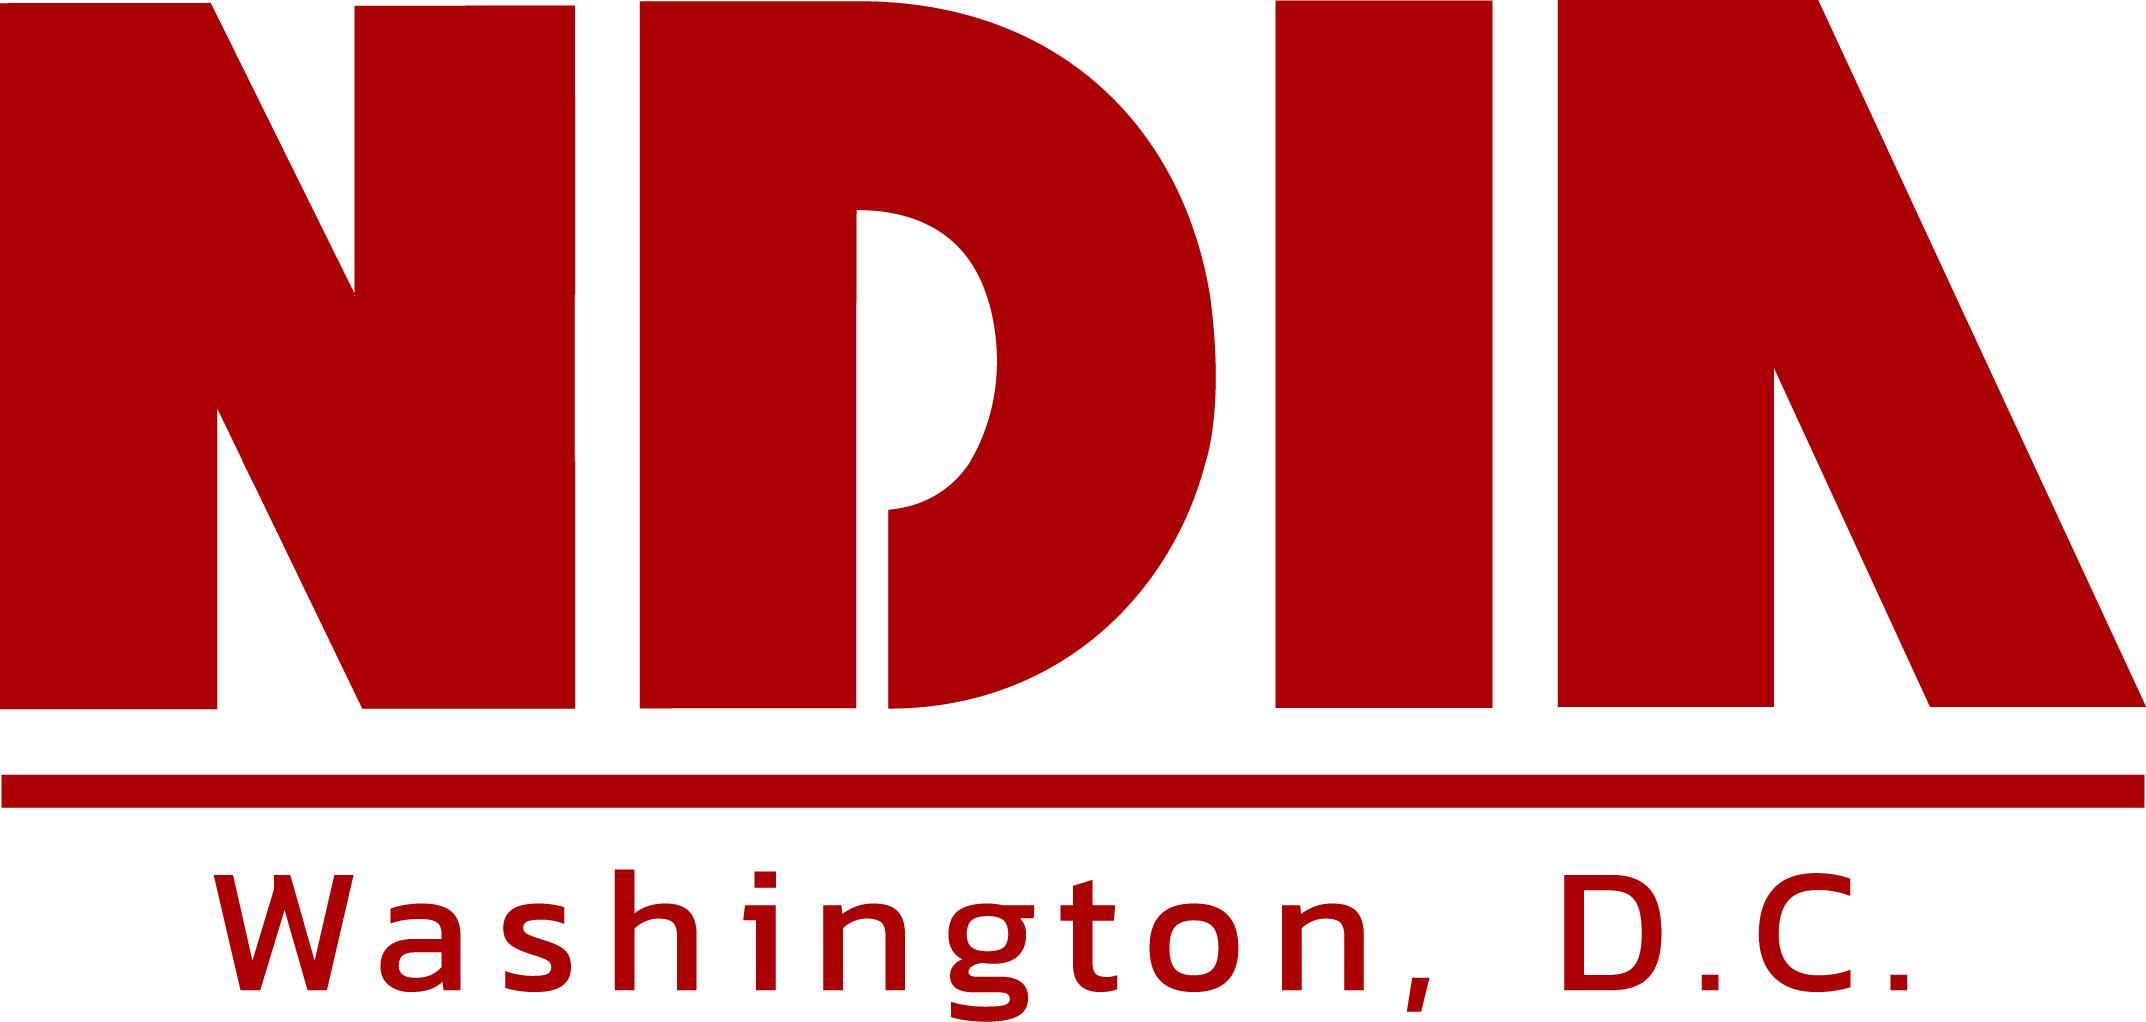 2020 Swing for Freedom Golf Invitational benefitting USO-Metro Hosted by NDIA Washington, D.C. Chapter May 8, 2020